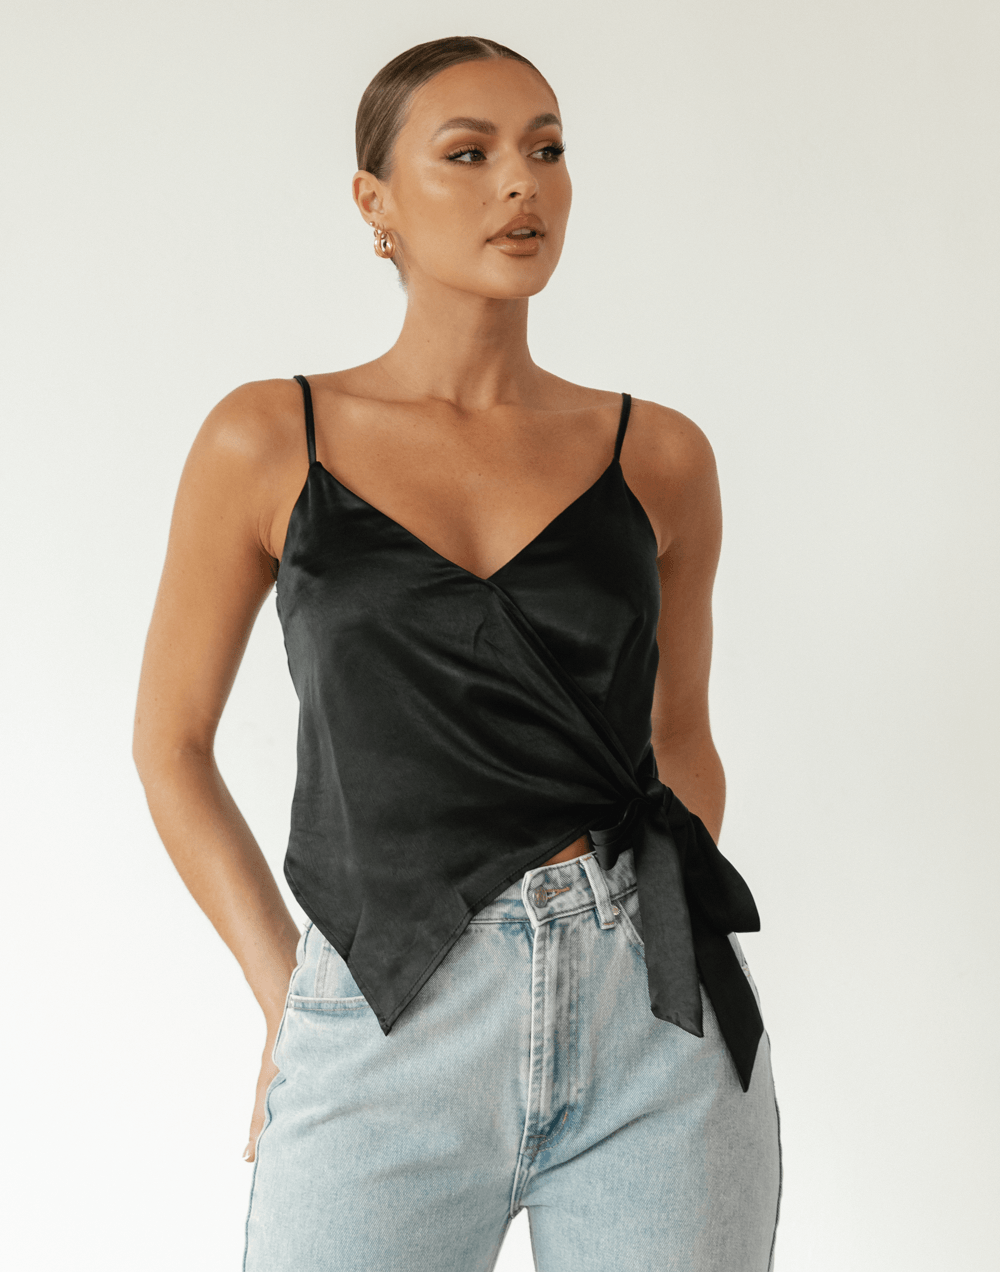 Asher Top (Black) - Black Tie-Up Top - Women's Top - Charcoal Clothing